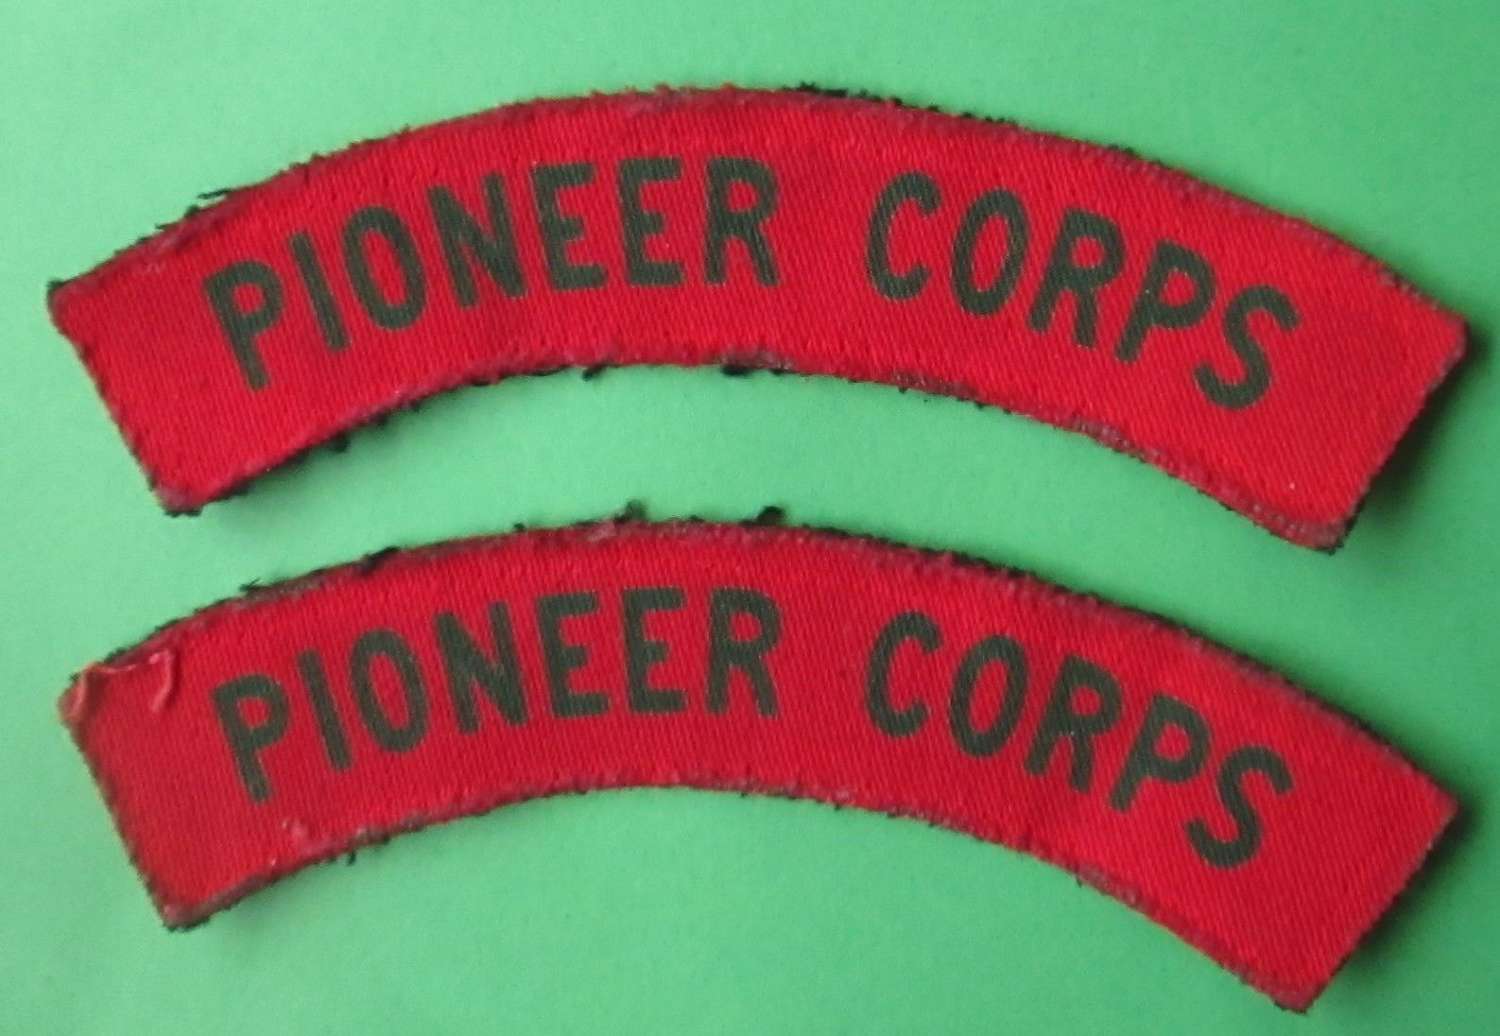 A PAIR OF PIONEER CORPS SHOULDER TITLES